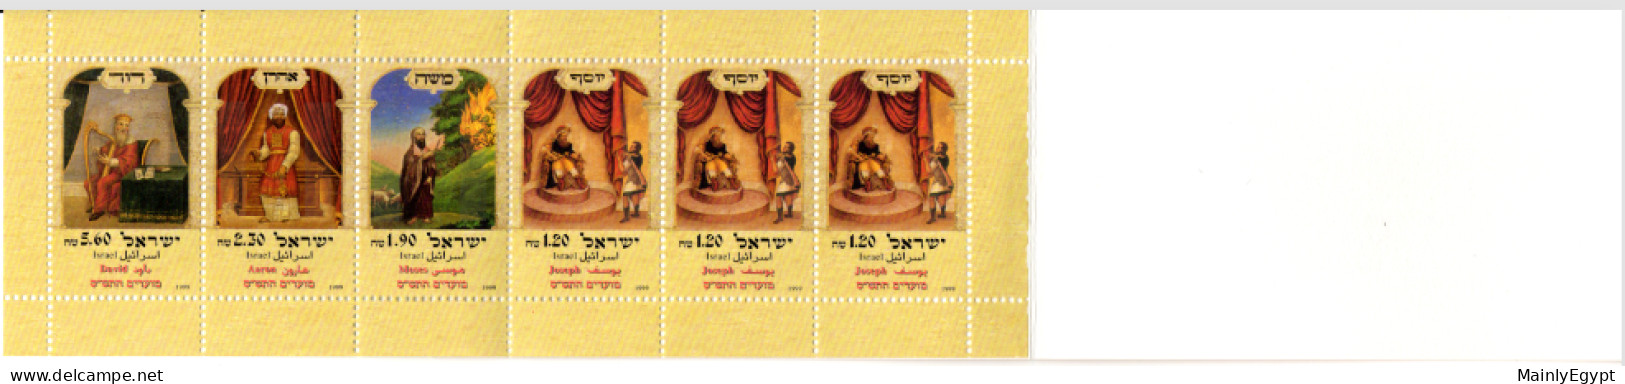 ISRAEL:  Stamp Booklet 1999 Jewish Feasts MNH #F031 - Booklets